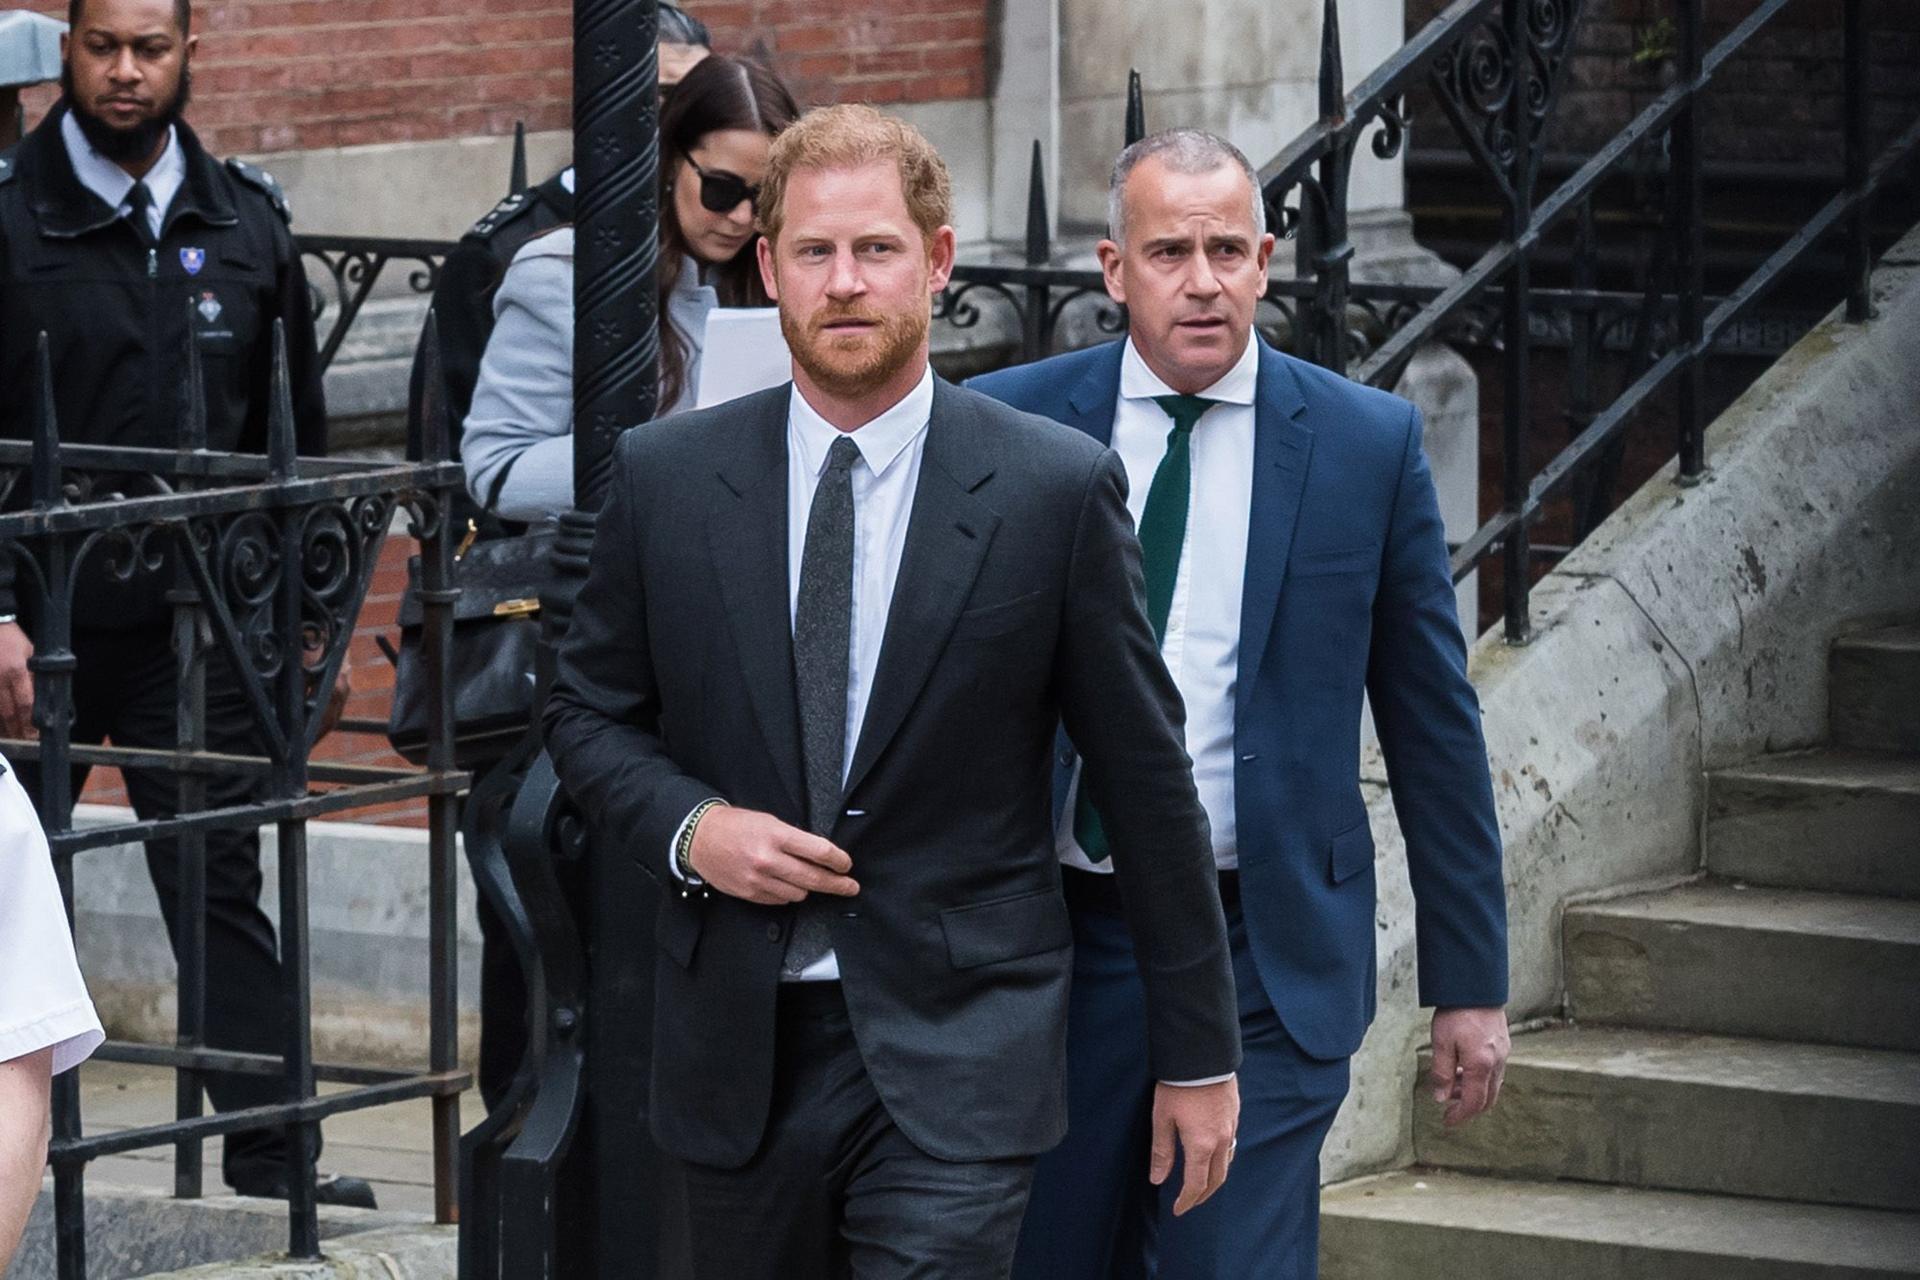  The Duke of Sussex retursn to the UK for preliminary hearings in his privacy case against Associated Newspapers Limited in March. 